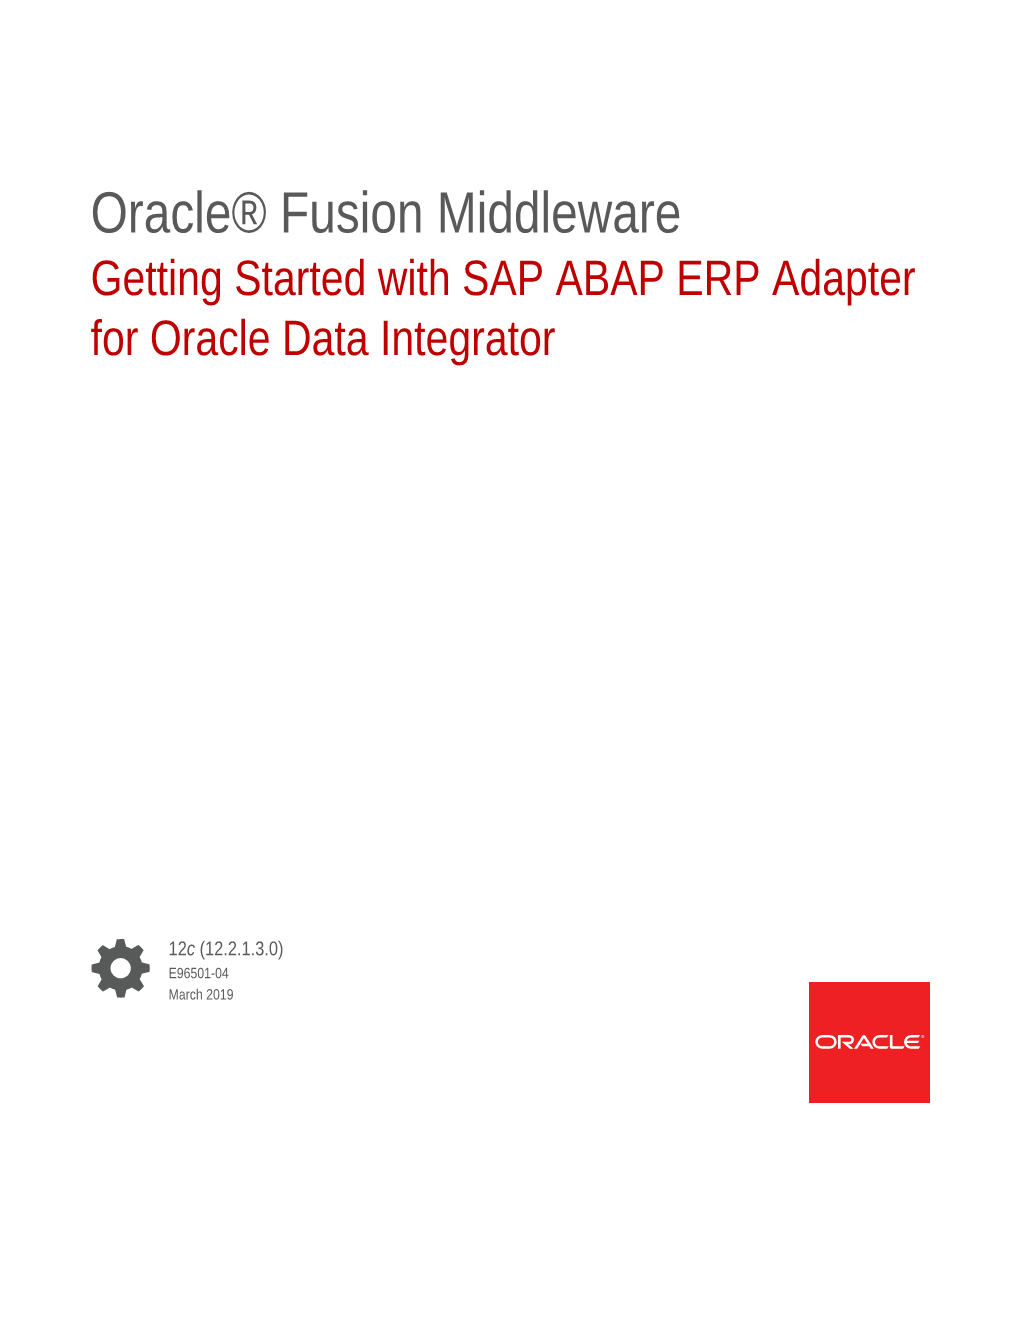 Getting Started with SAP ABAP ERP Adapter for Oracle Data Integrator